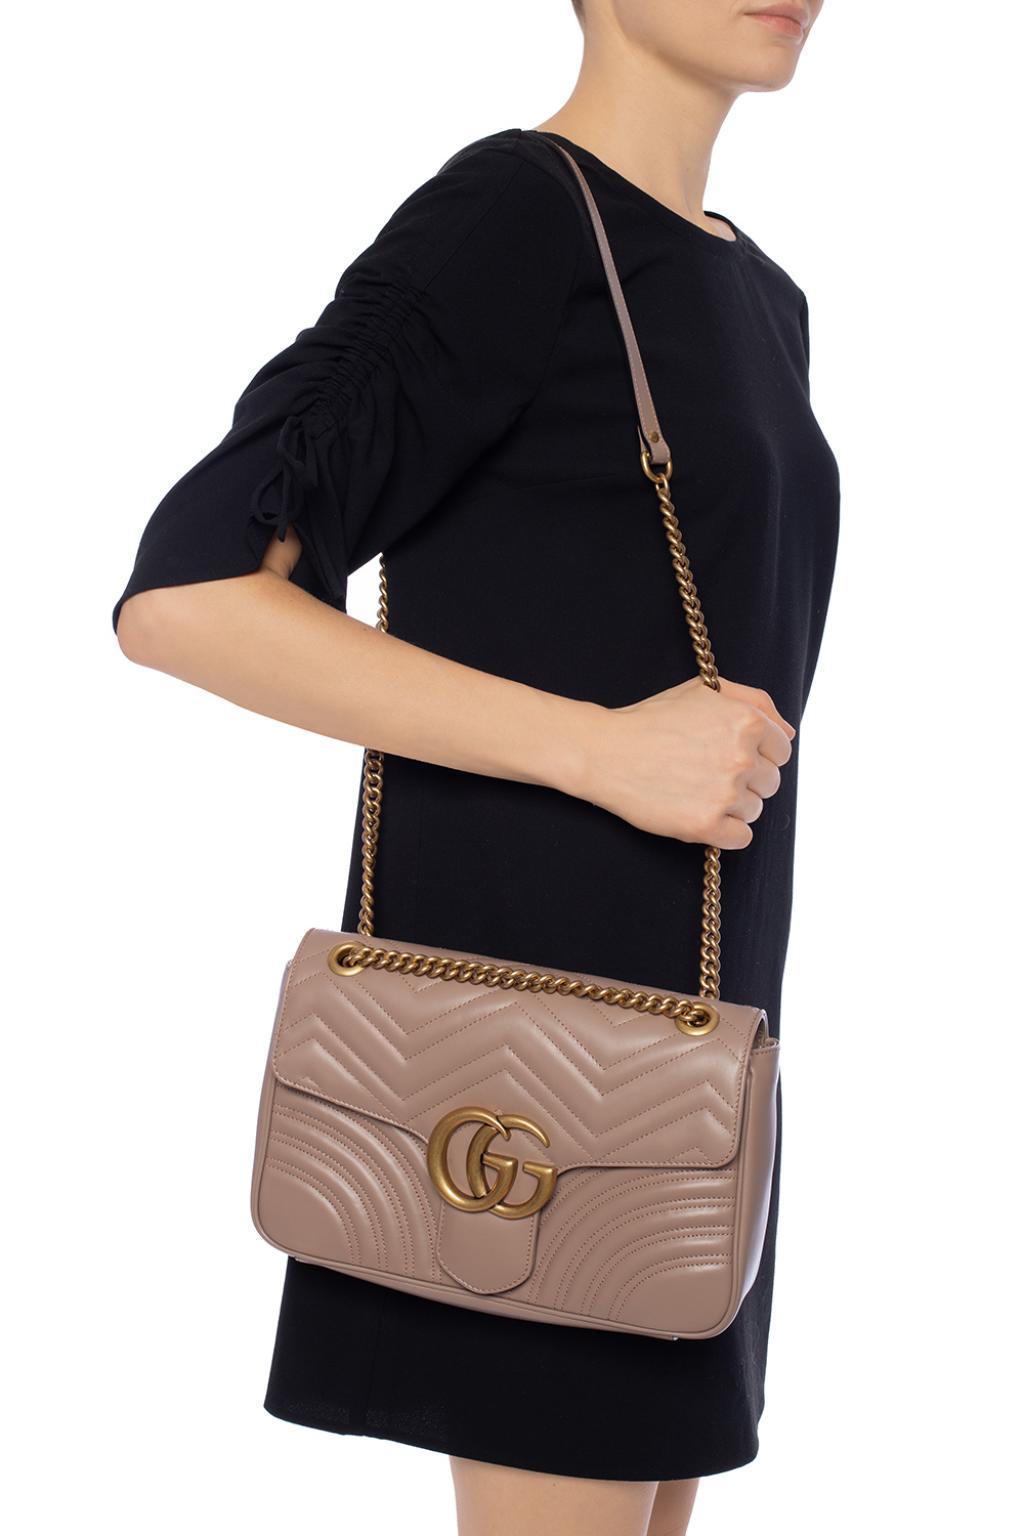 Gucci &#39;GG Marmont&#39; Shoulder Bag in Brown - Lyst